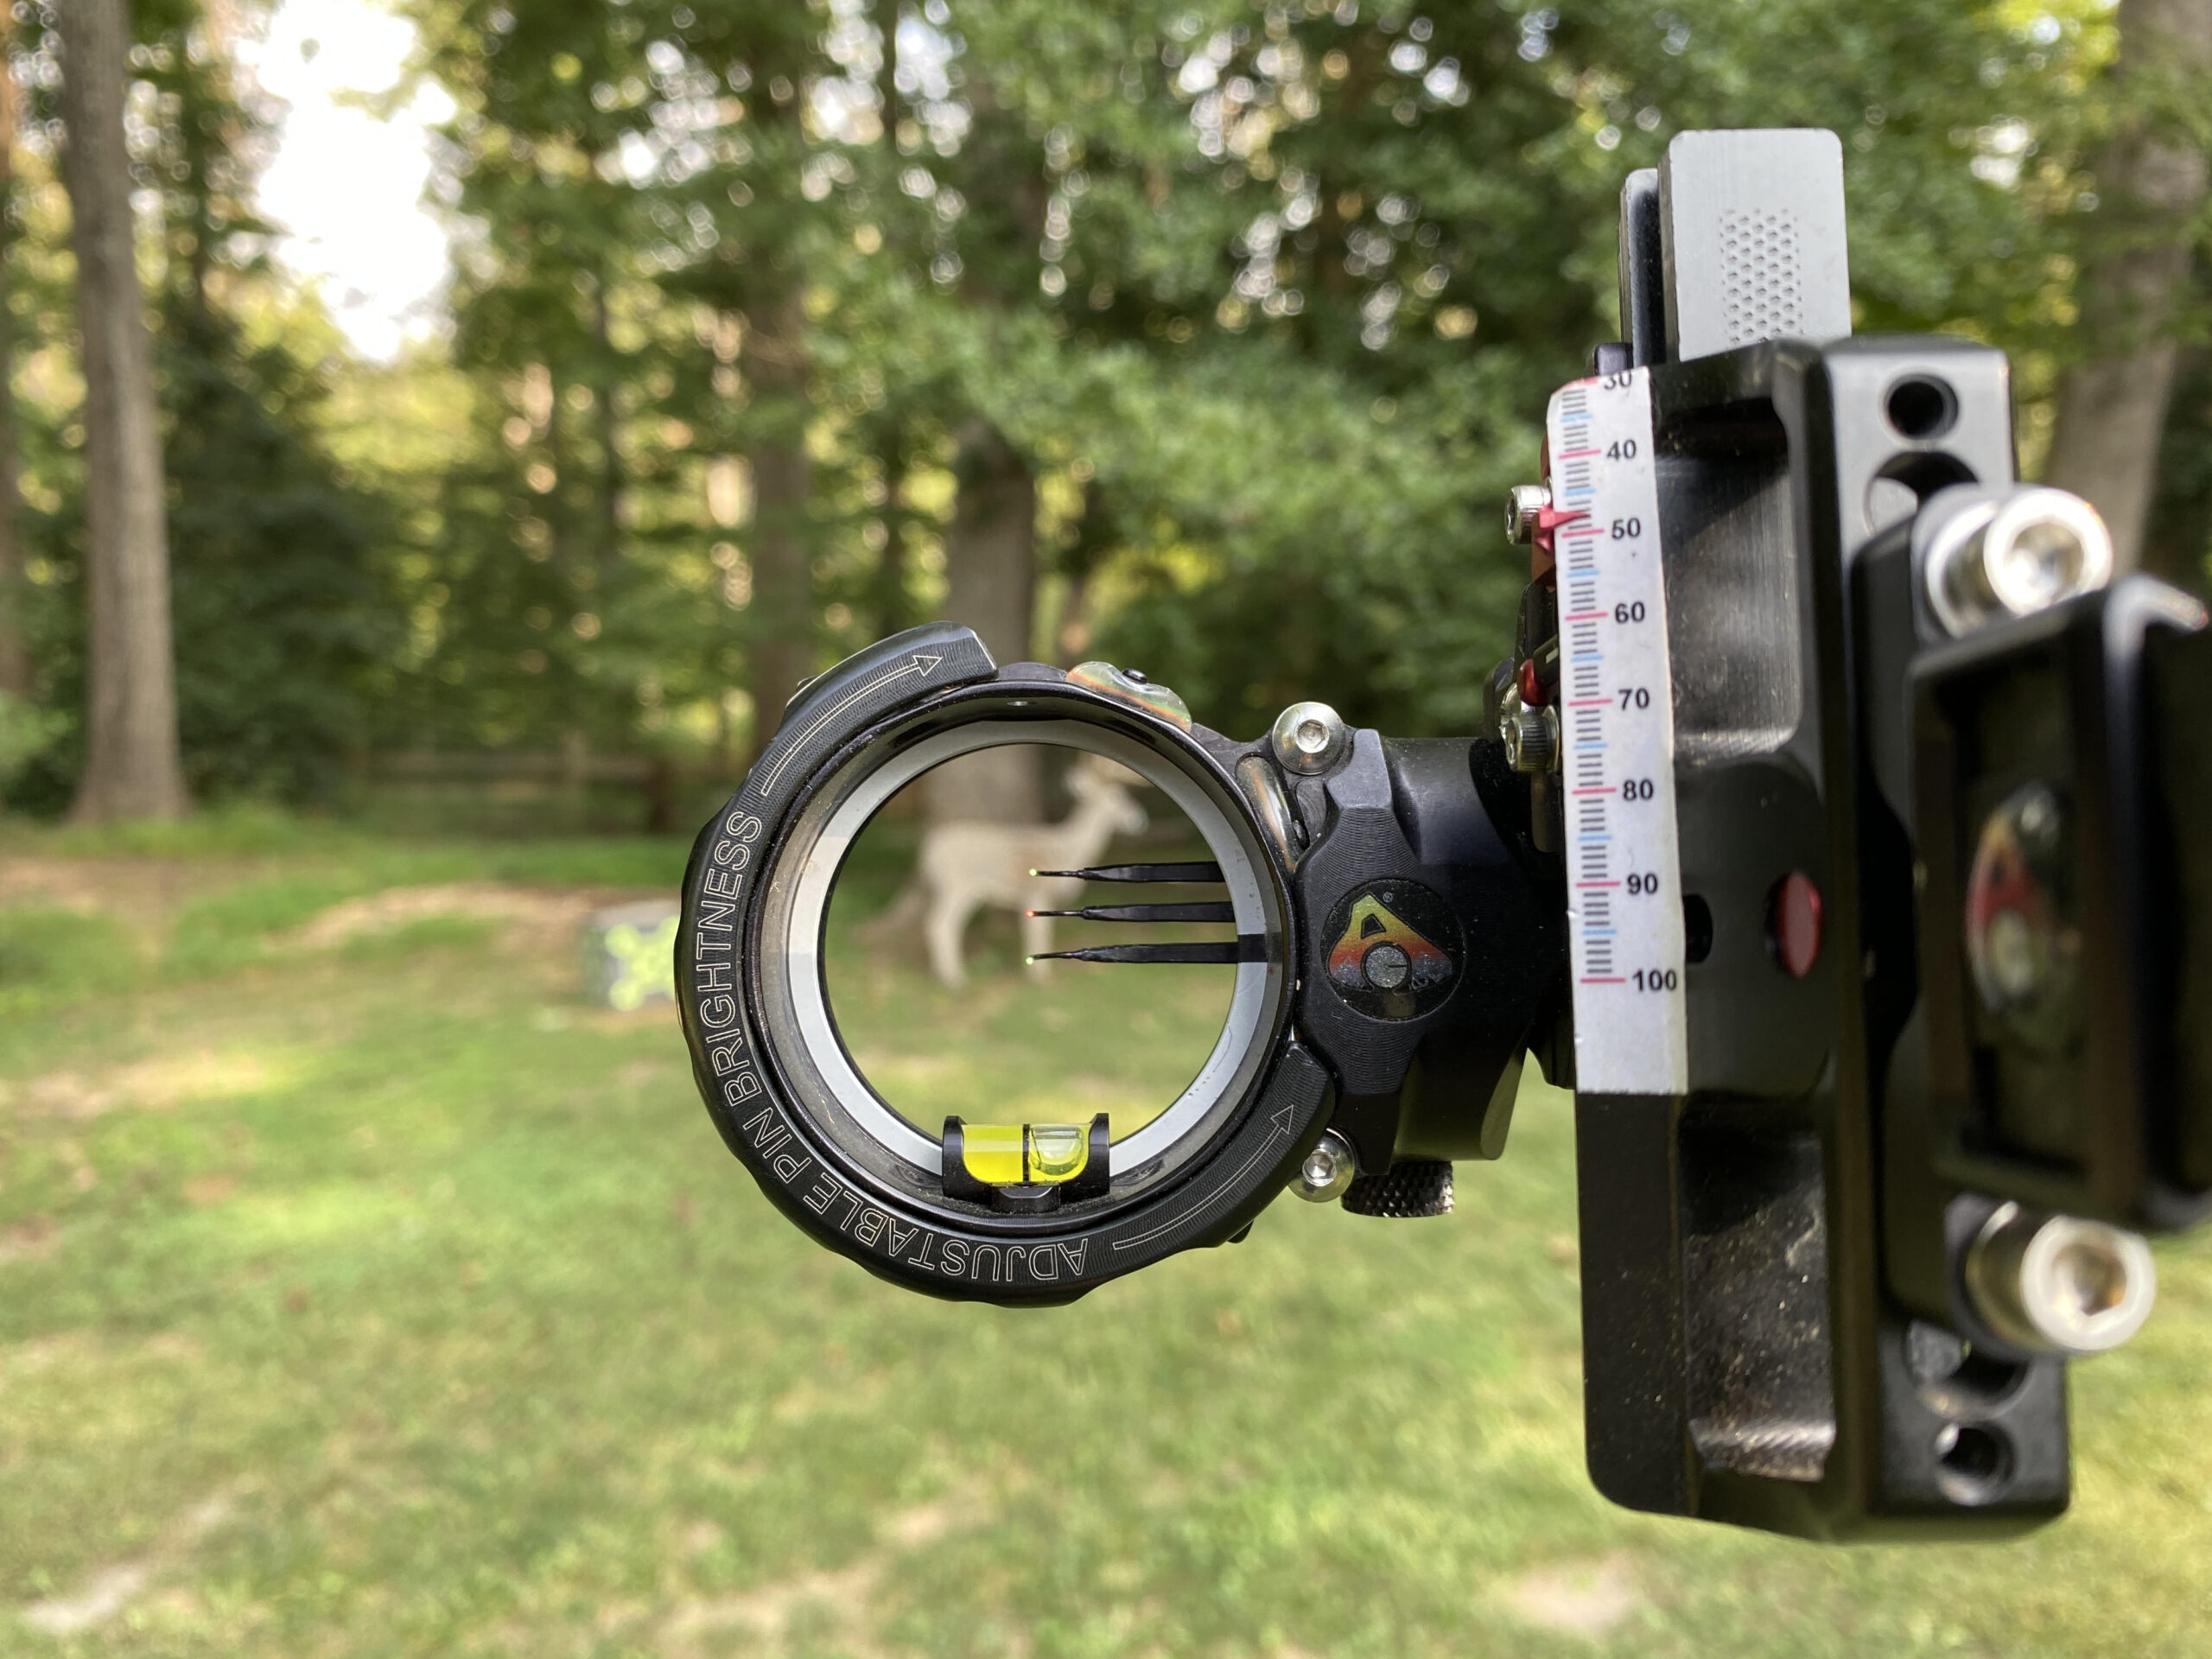 A target pictured through a sight